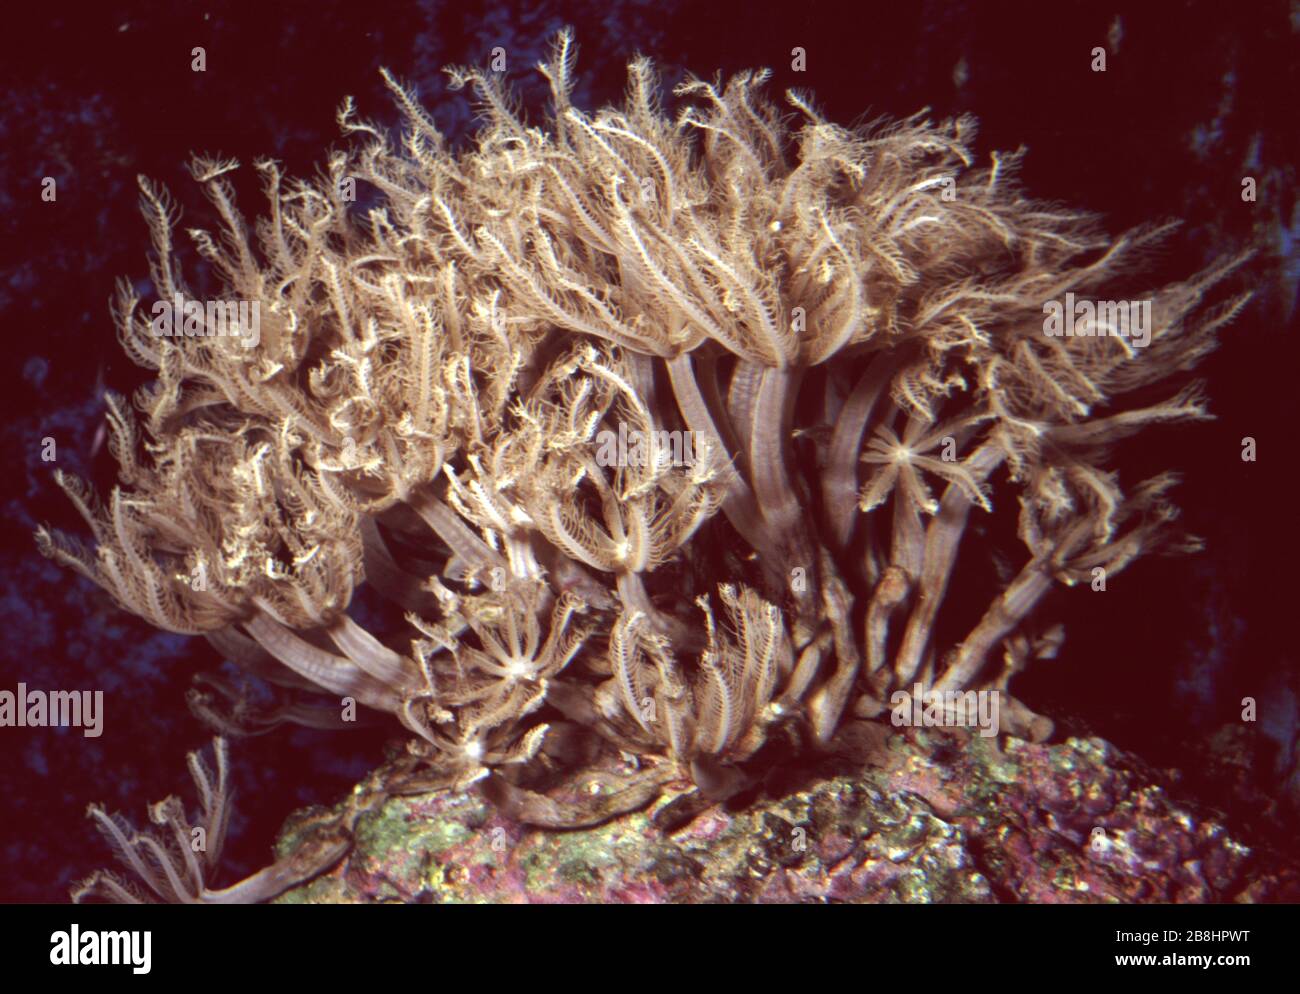 Pulse or Pumping coral, Xenia sp. Stock Photo